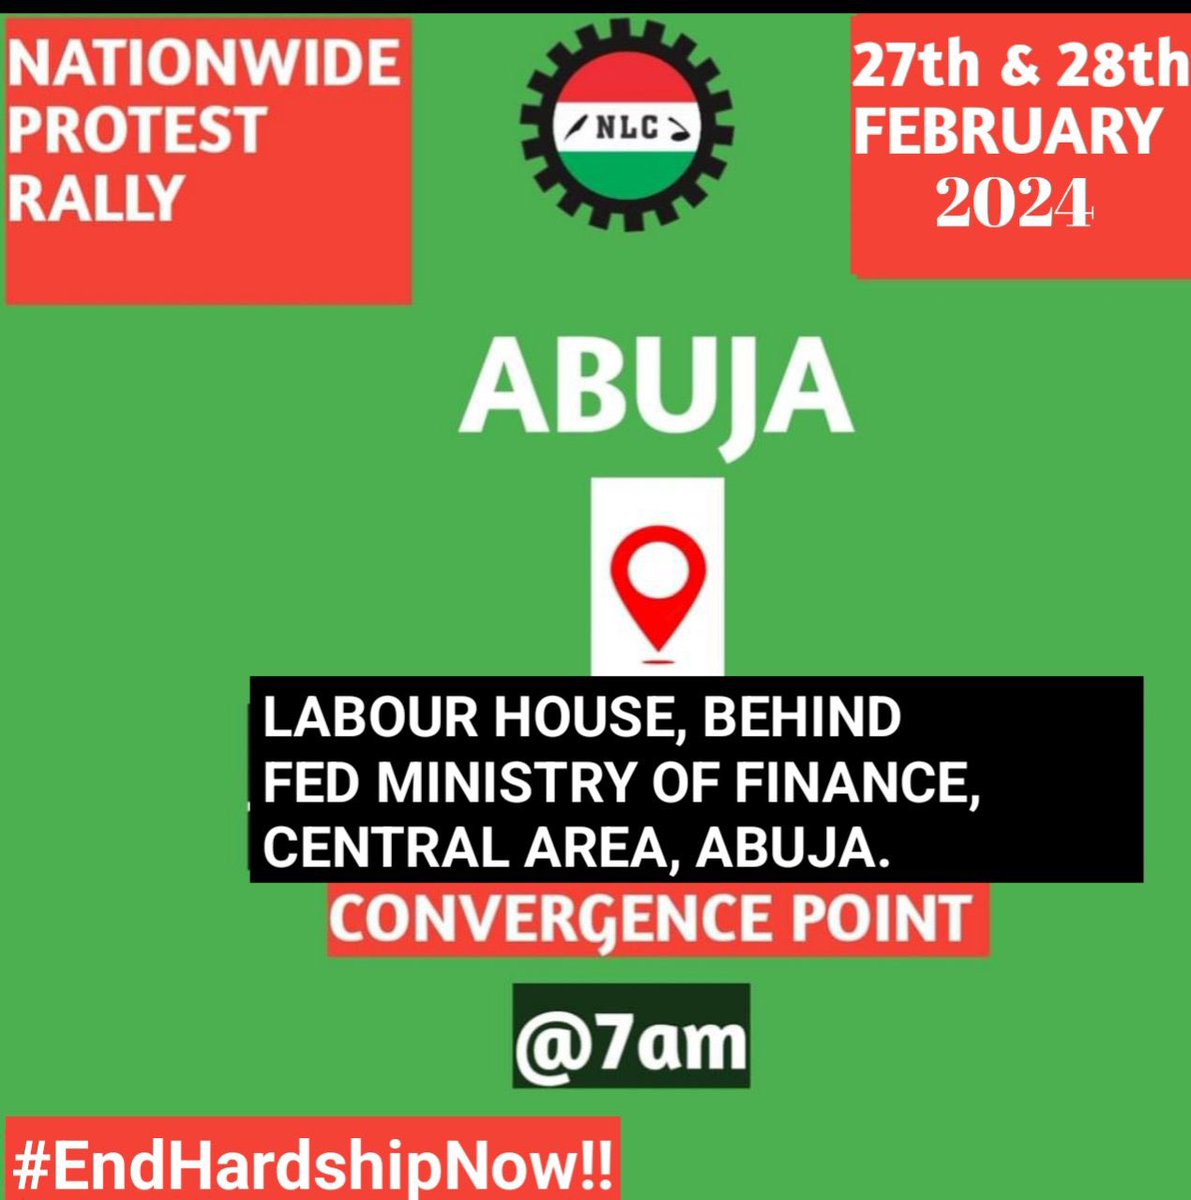 Despite the late hour indoor meeting with the FG, Nigeria Labour Congress still proceed with their protest tomorrow 

#EndHardshipNow!
#EndHungerNow!
ABUJA !!
Arise, O compatriots , and together We shall speak truth to Power